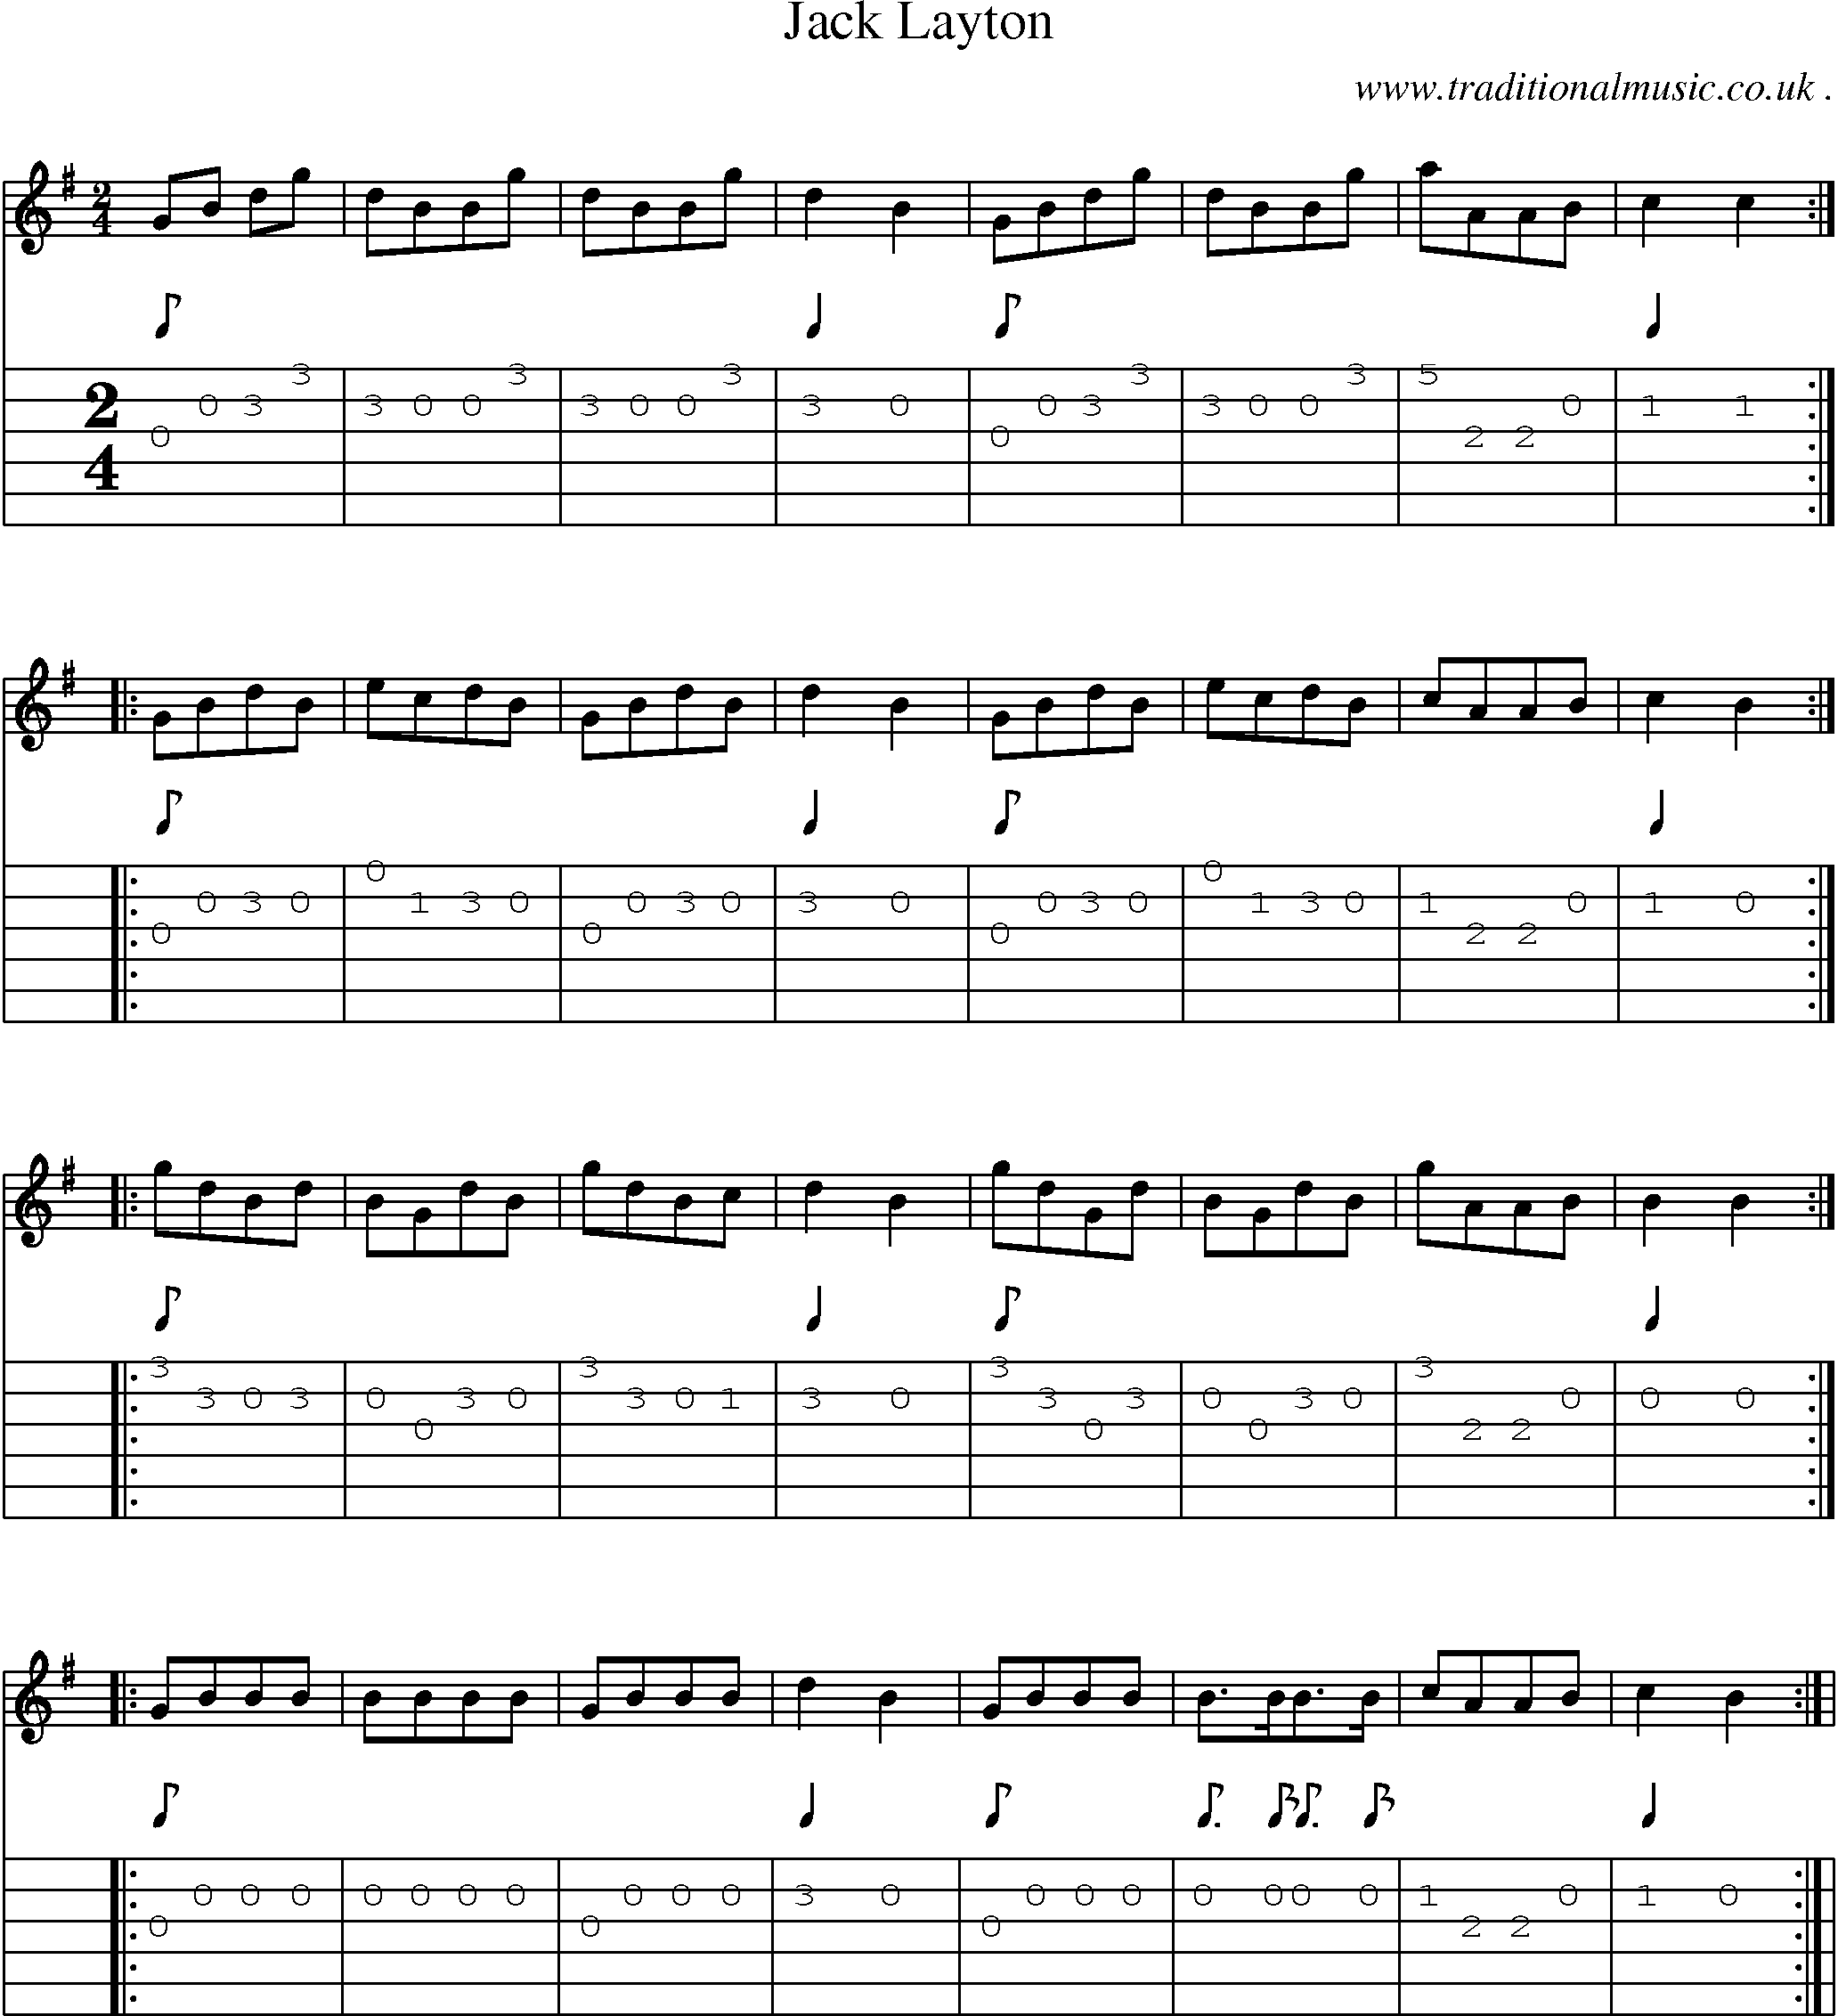 Sheet-Music and Guitar Tabs for Jack Layton